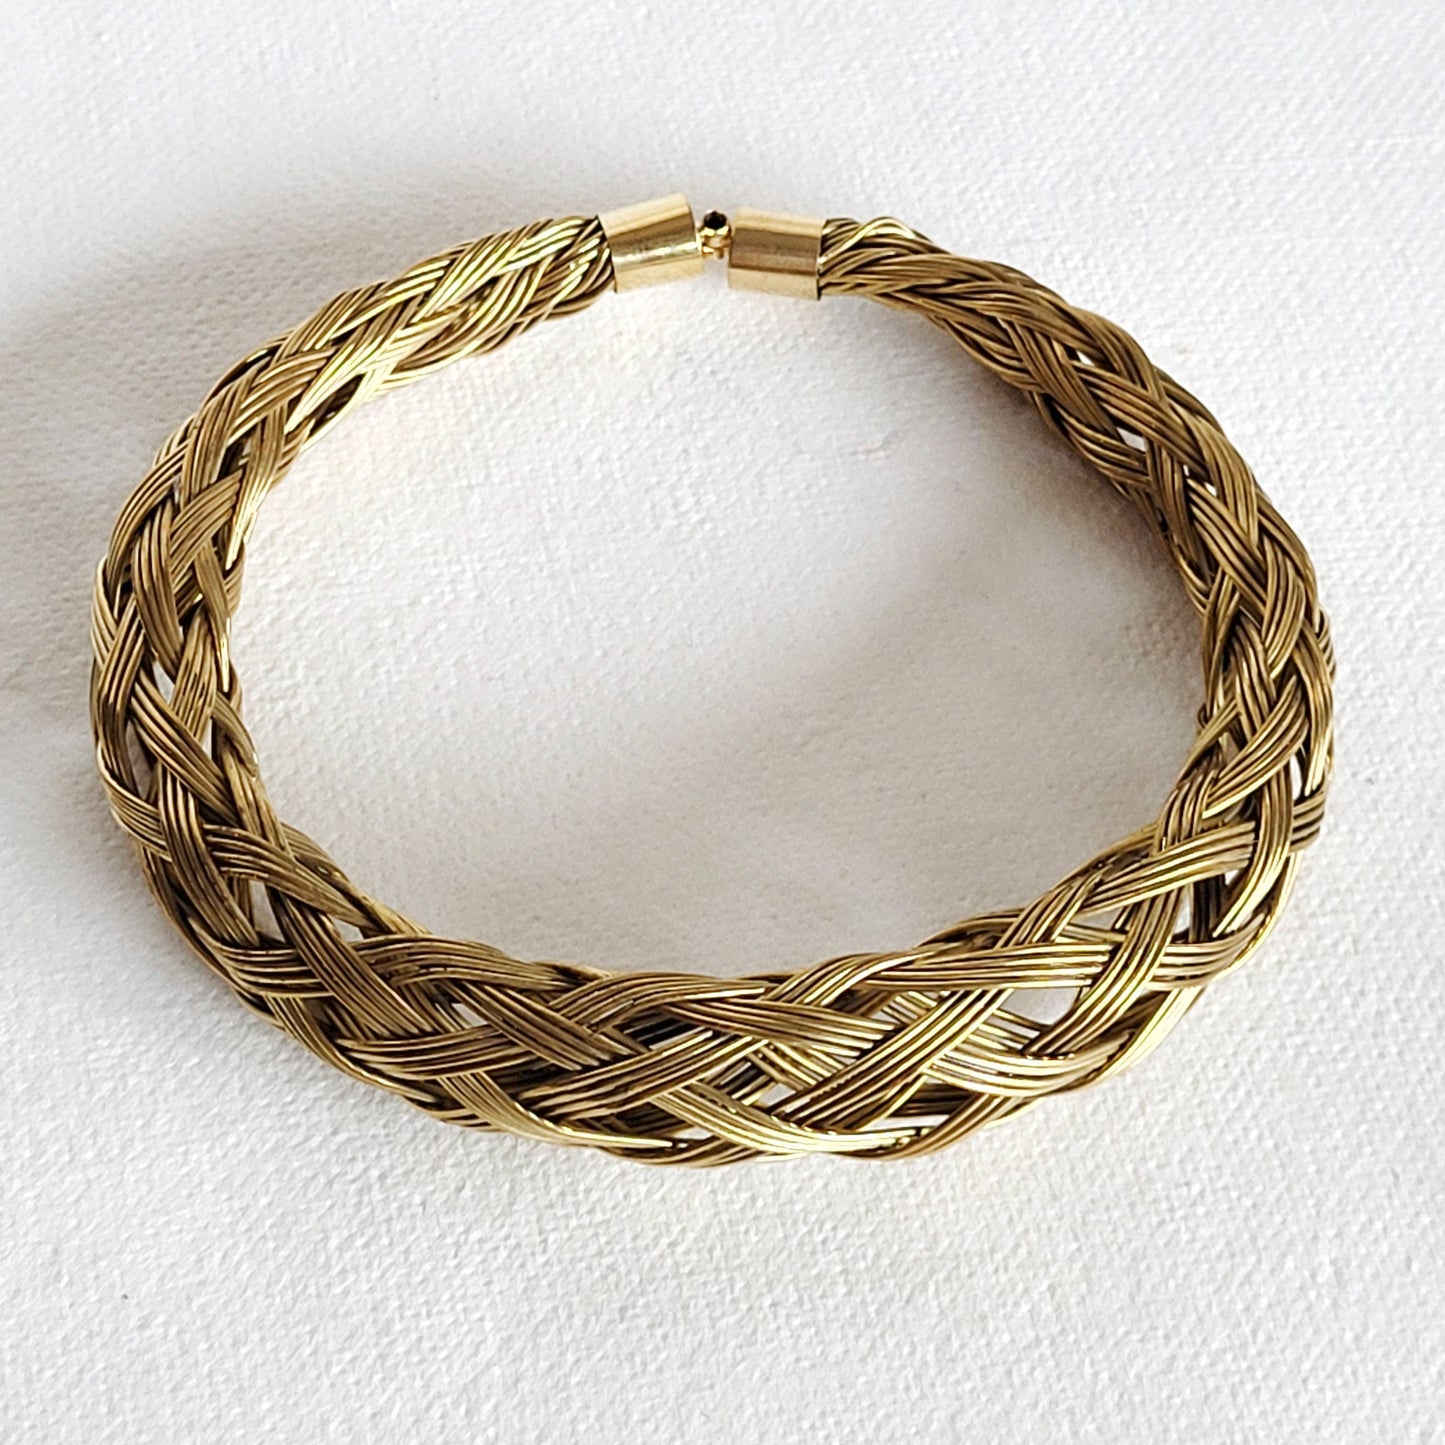 Bisjoux - Brass braided collar woven necklace cuff armlet options